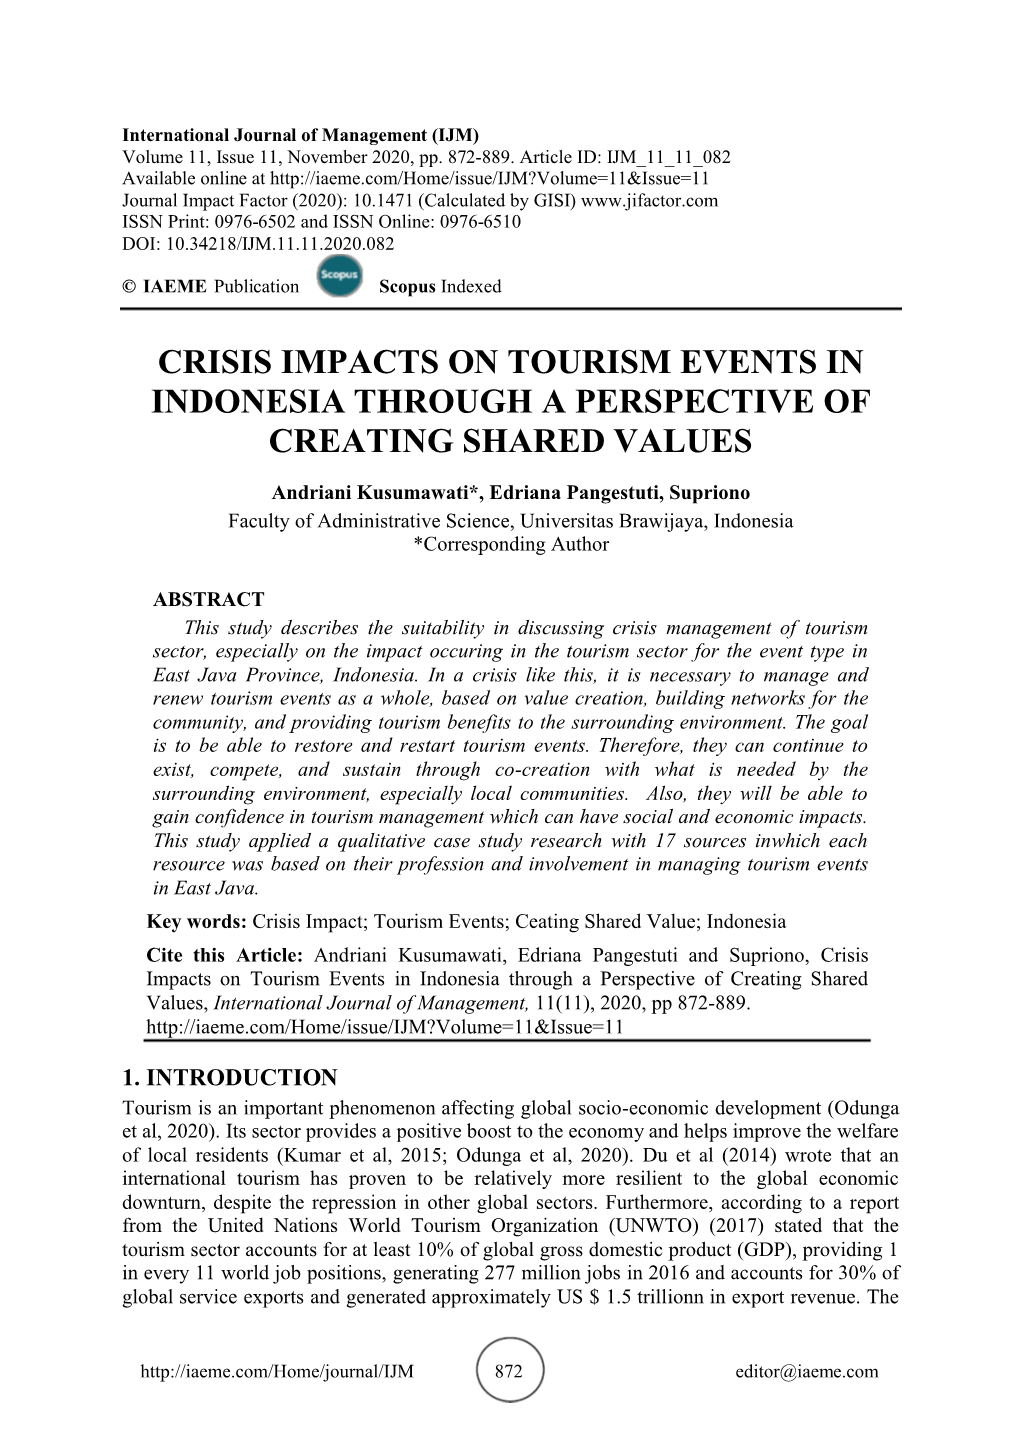 Crisis Impacts on Tourism Events in Indonesia Through a Perspective of Creating Shared Values